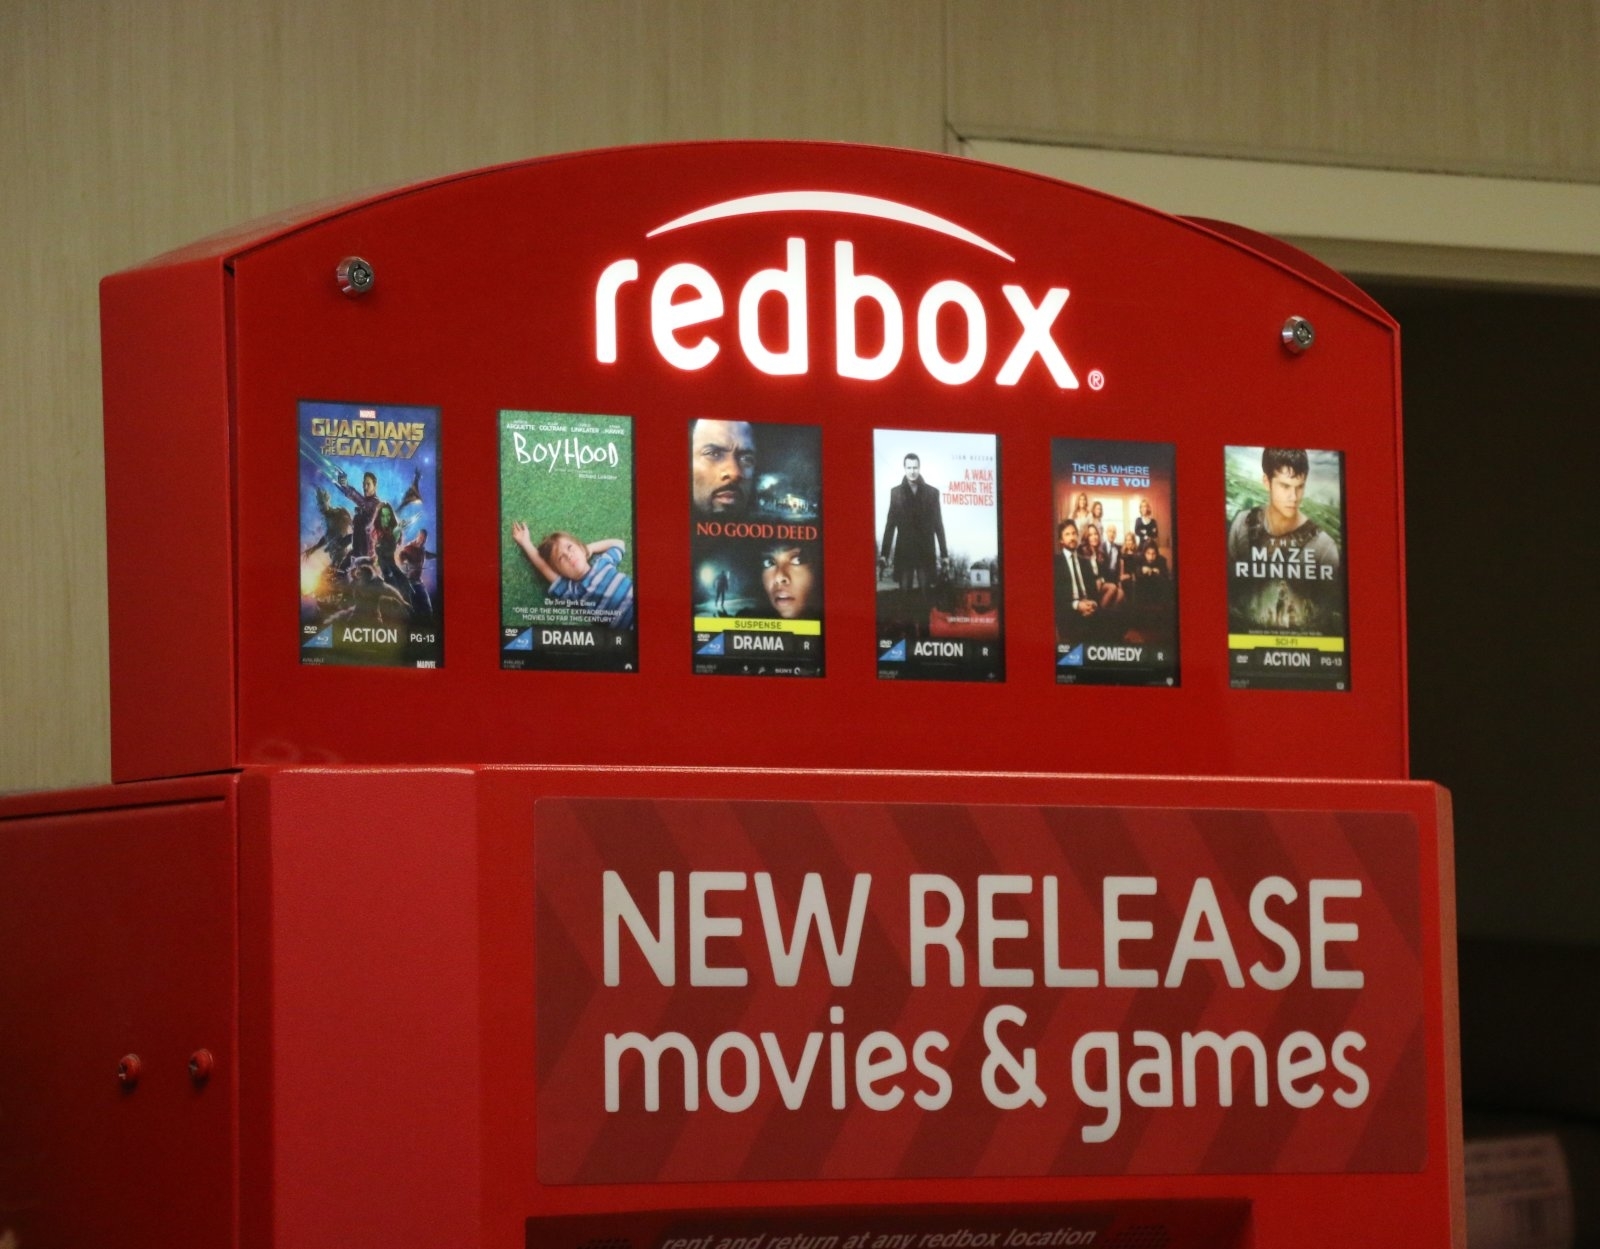 Redbox deals with Sony and Lionsgate bring discs with no delay | DeviceDaily.com